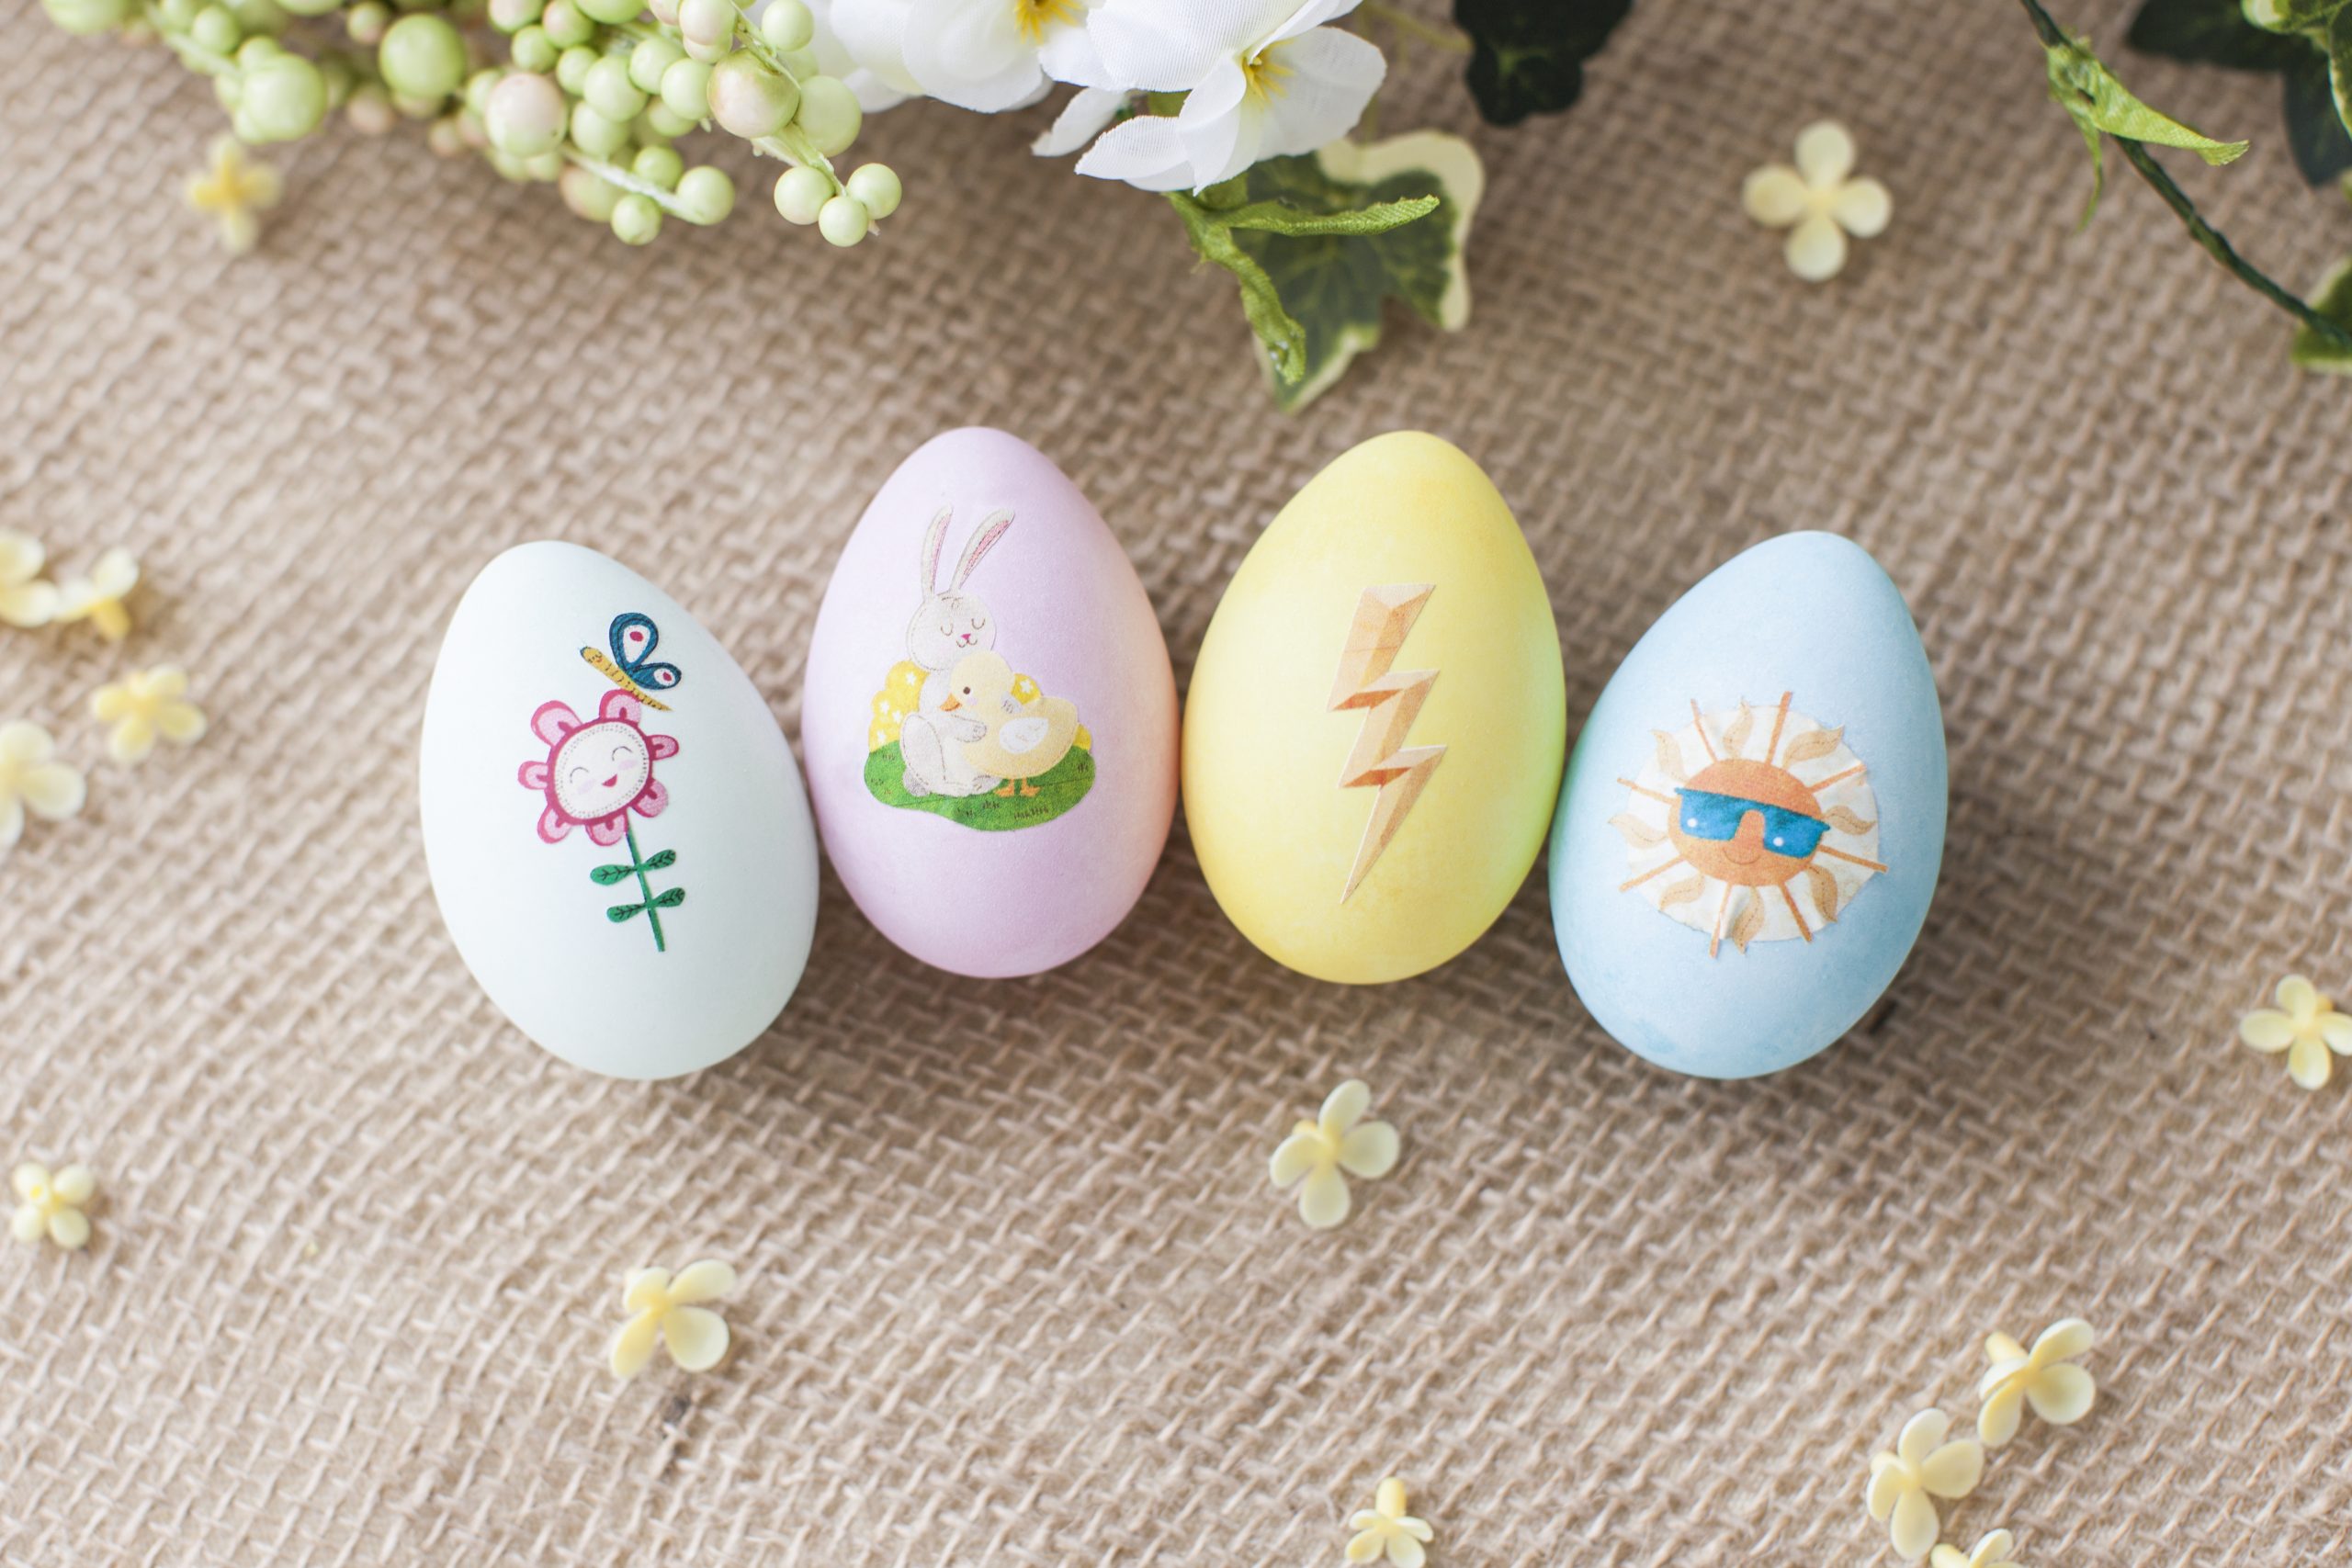 6 ways to get creative with eggs this Easter